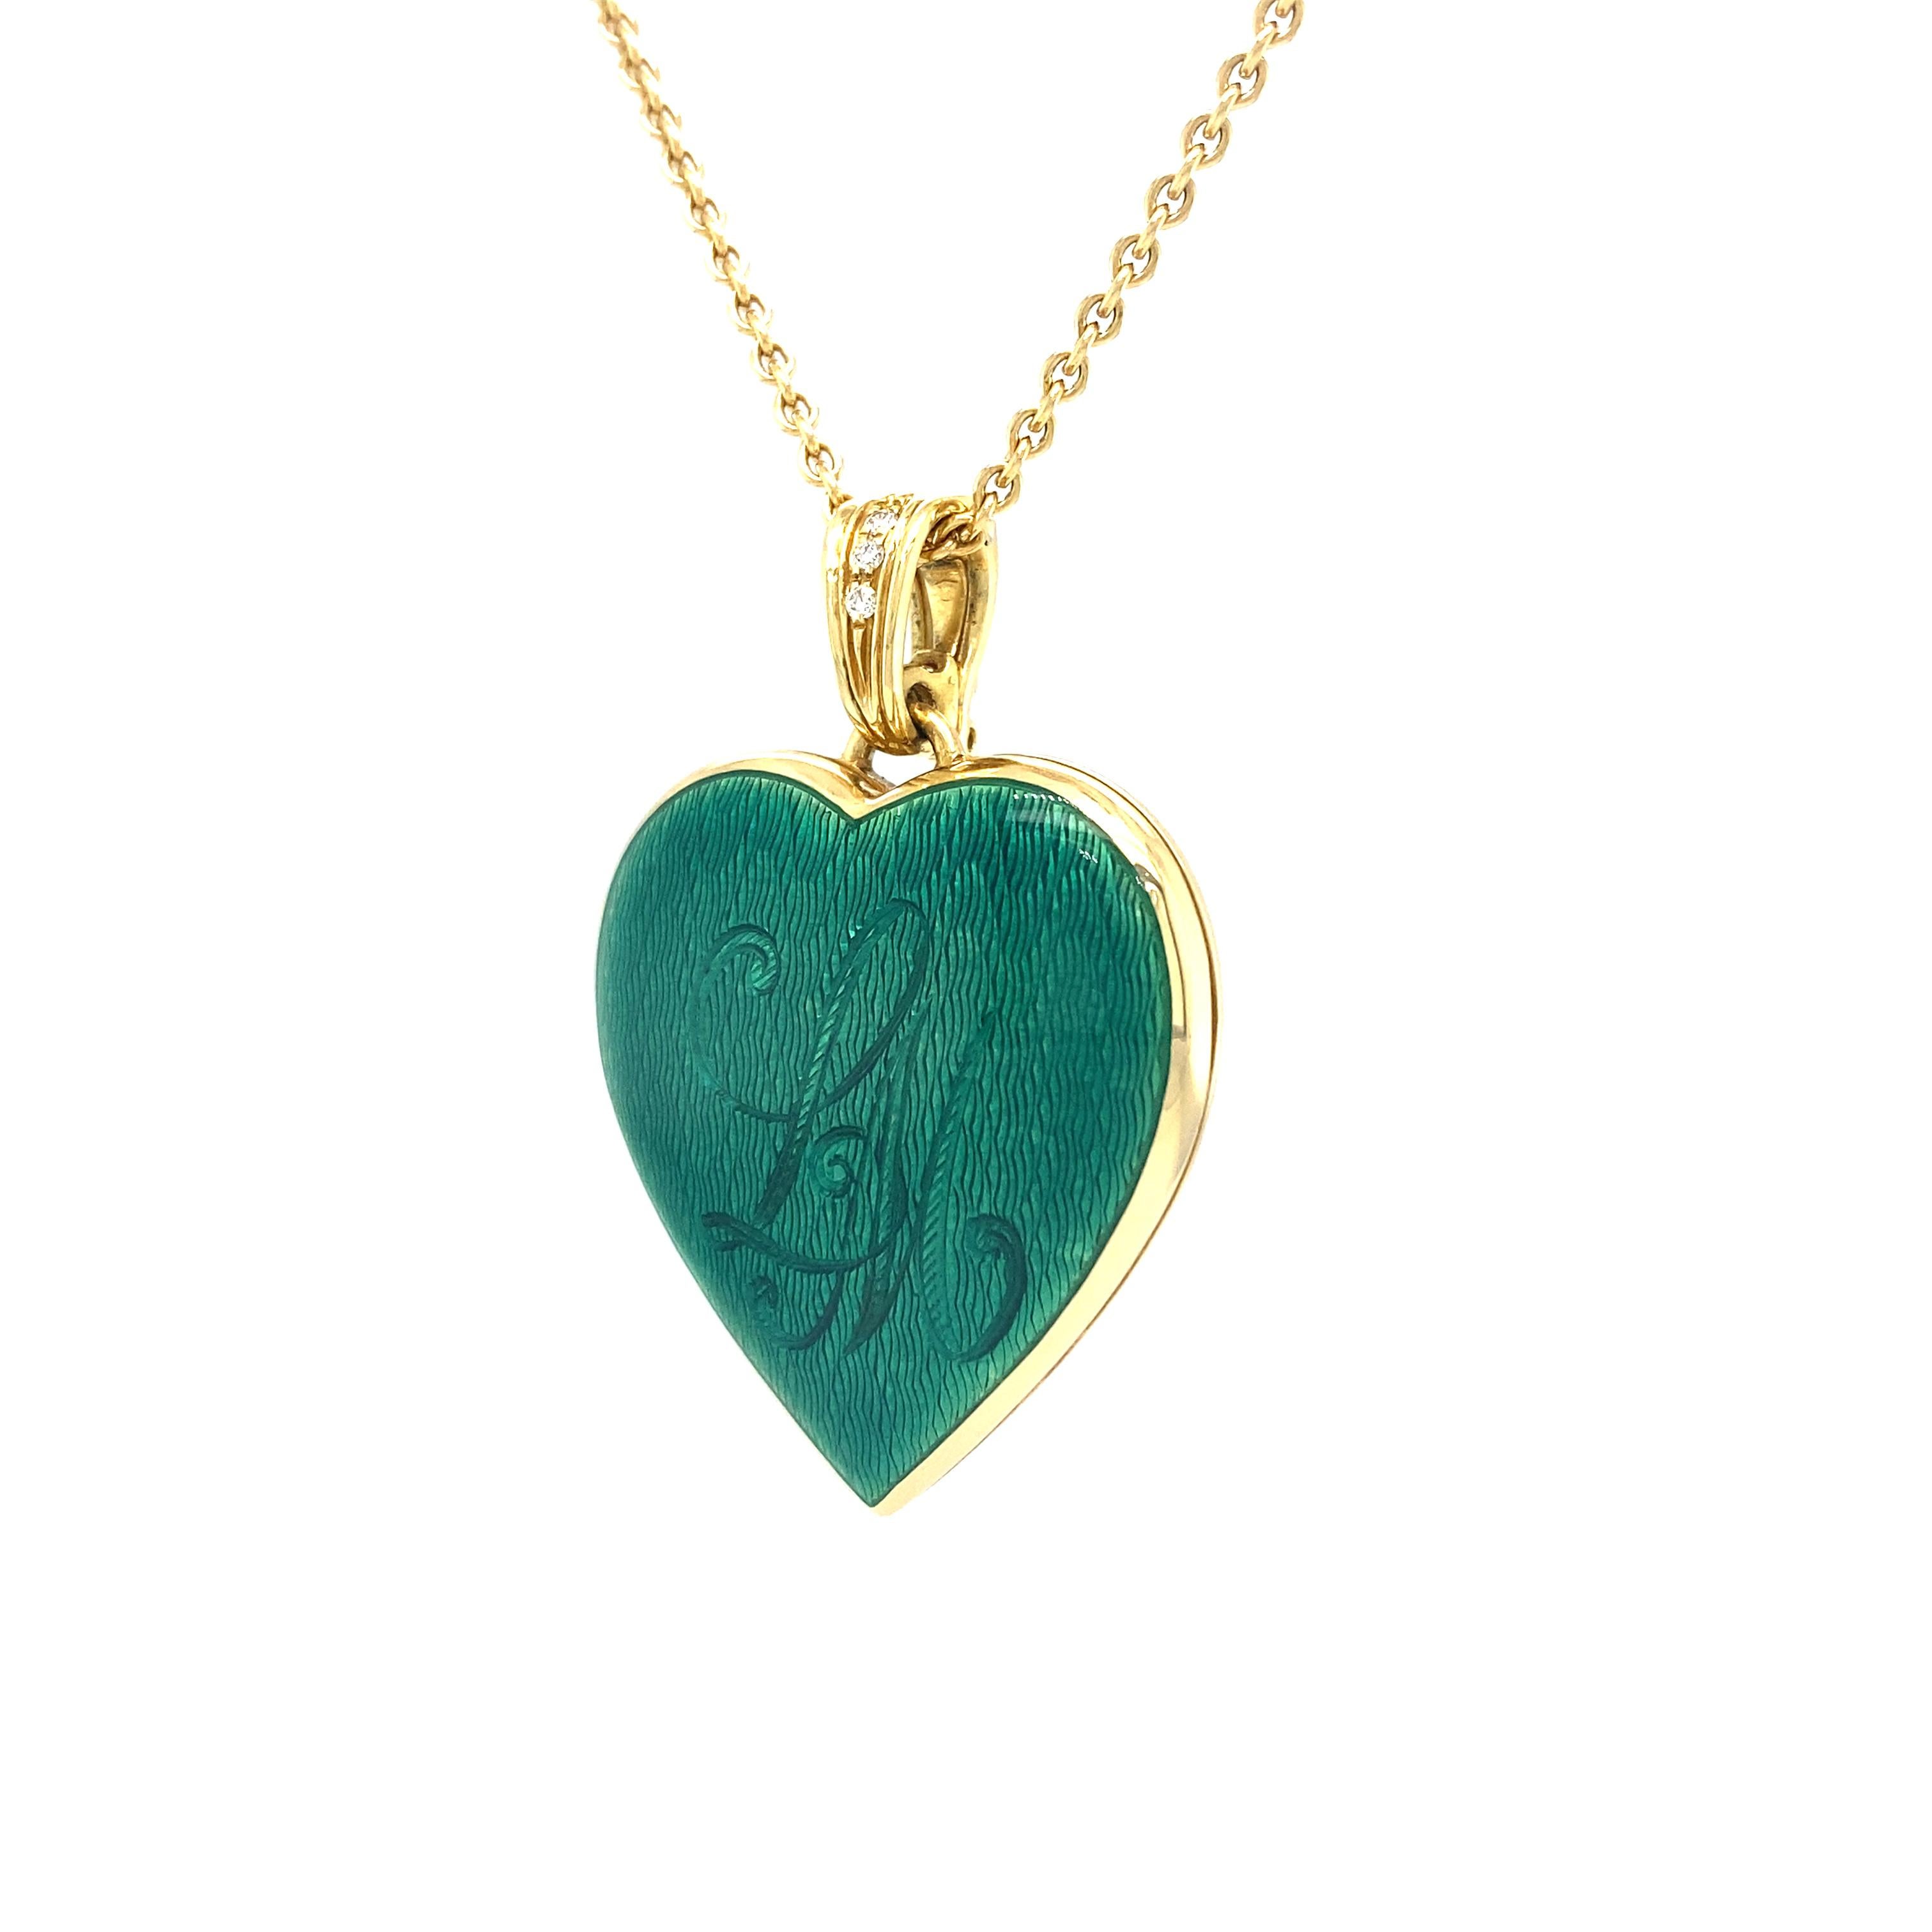 Victor Mayer heart pendant locket, 18k yellow gold, emerald greeen vitreous enamel, guilloche engraving and hand engraving of the letters >LM<, 3 diamonds, total 0.03 ct, G VS brilliant cut

About the creator Victor Mayer
Victor Mayer is